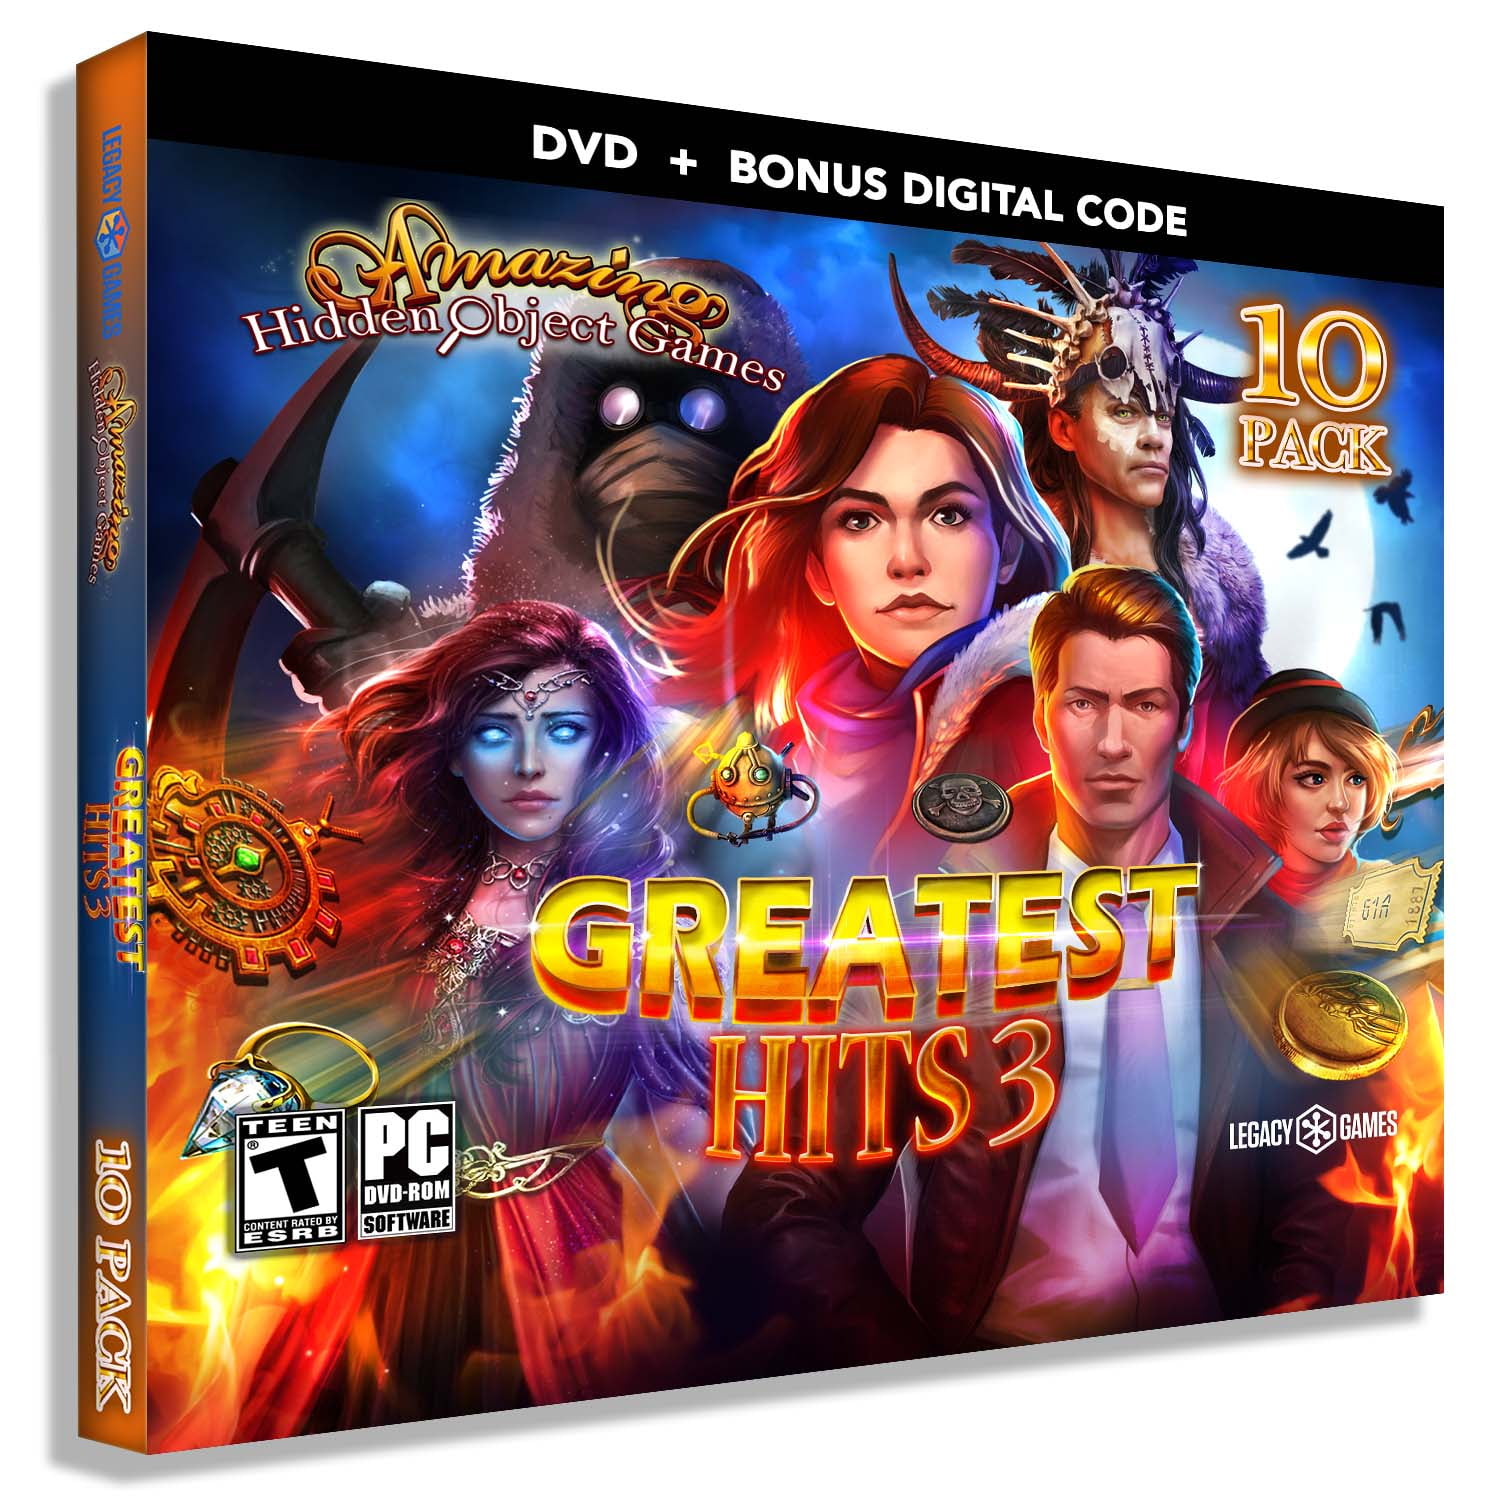 Amazing Hidden Object Games: Greatest Hits Vol. 3 - 10 Pack